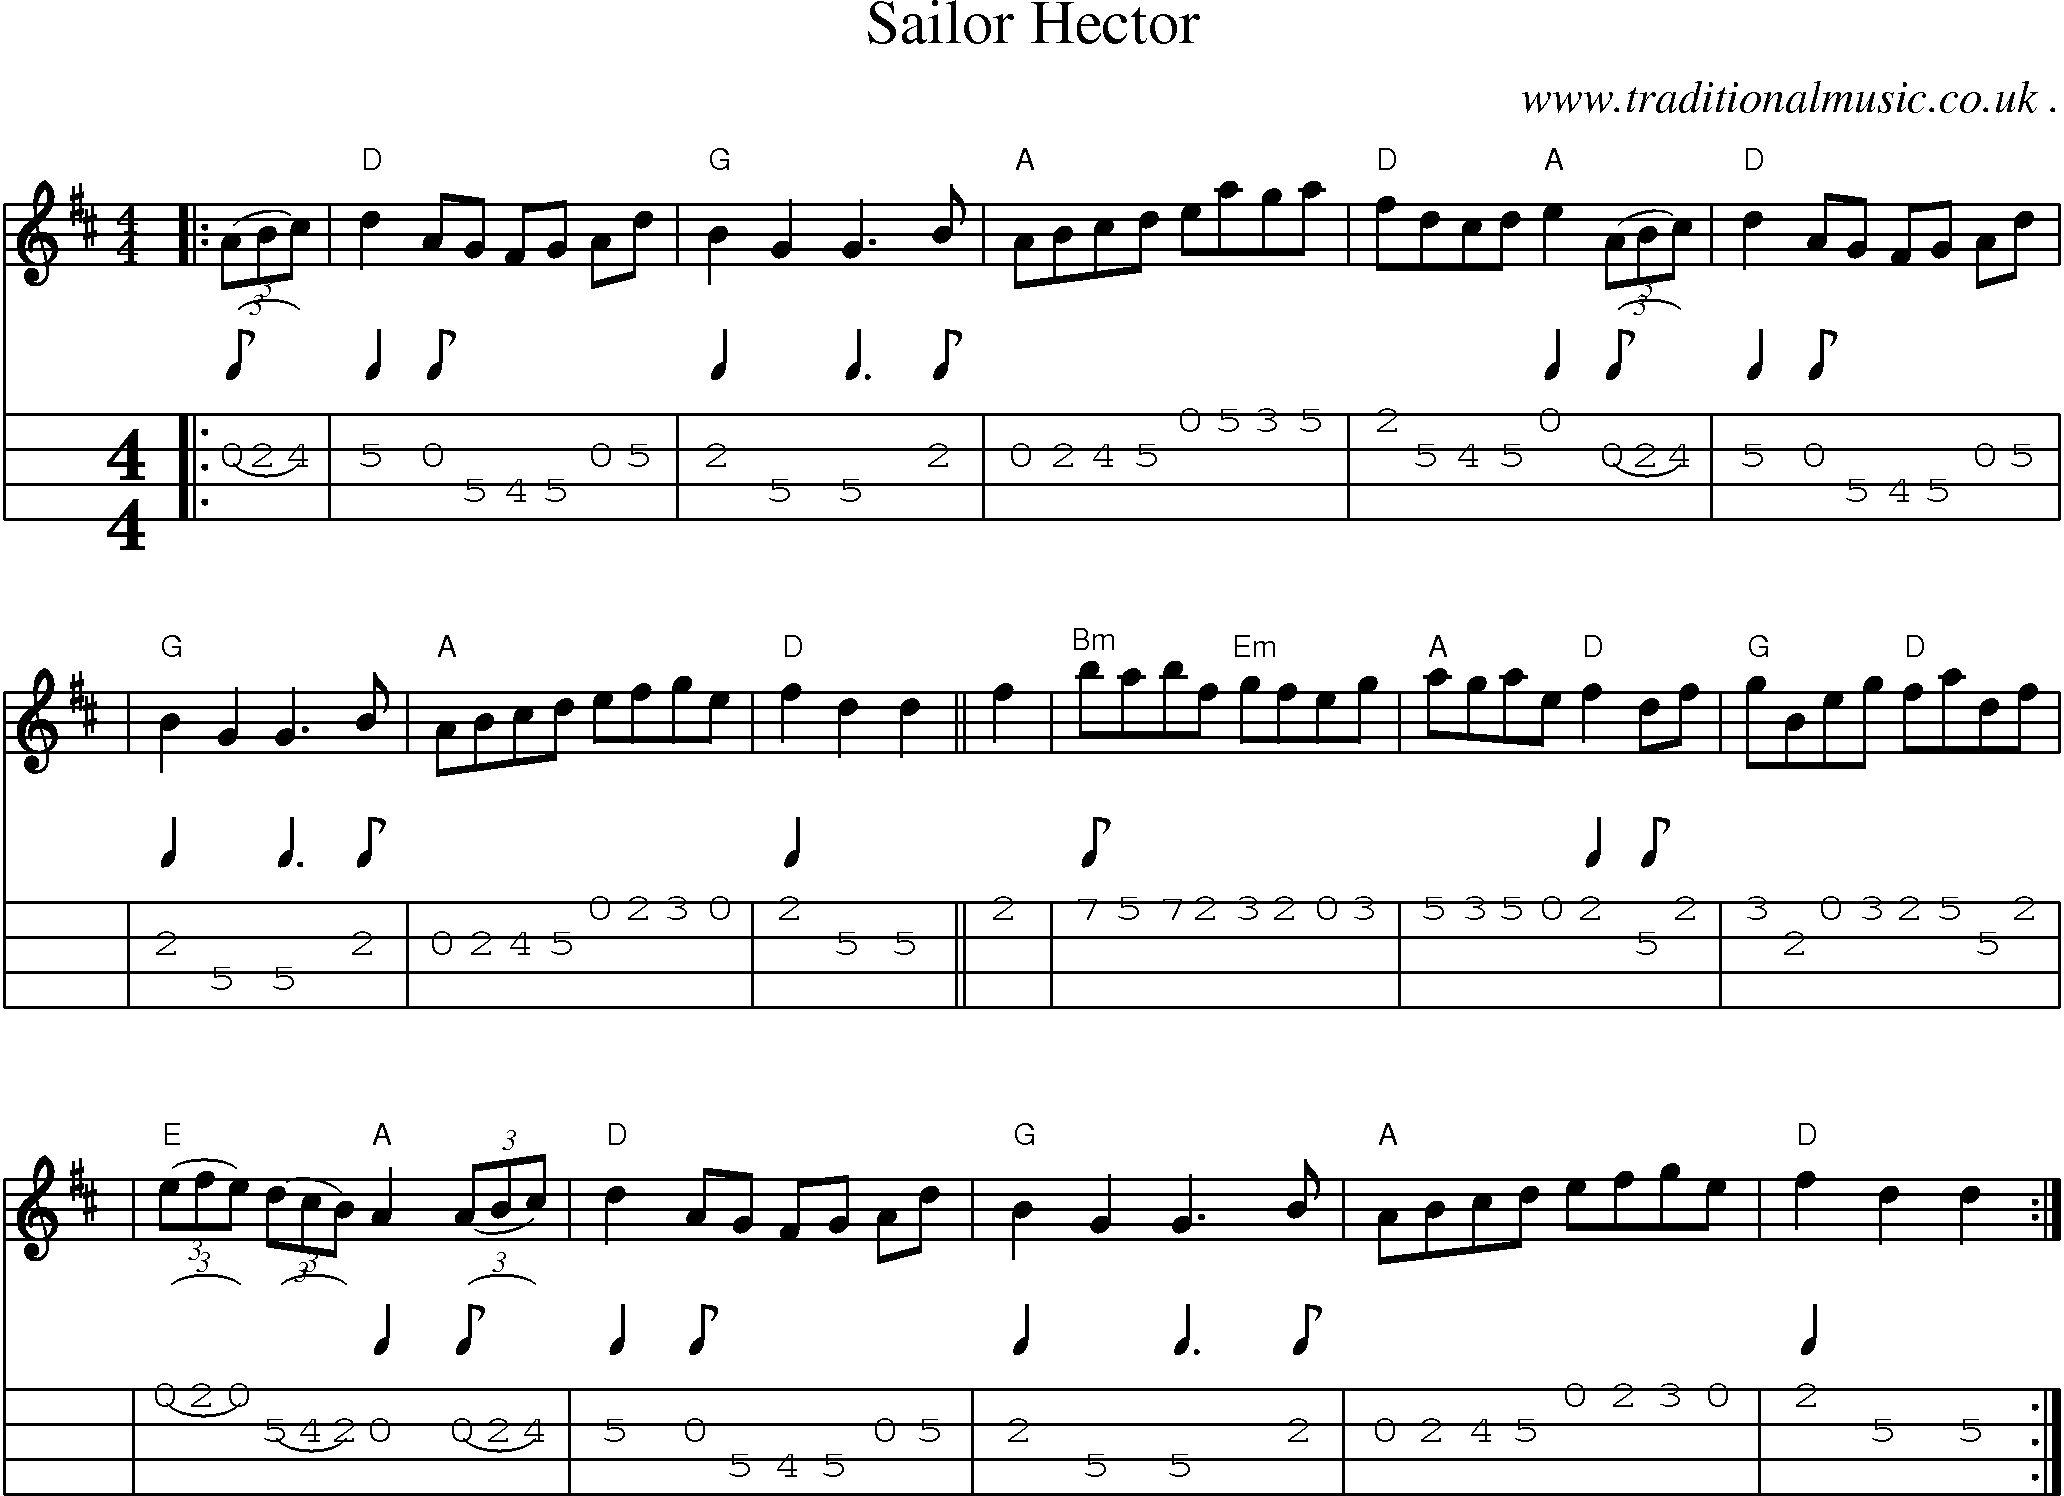 Sheet-music  score, Chords and Mandolin Tabs for Sailor Hector